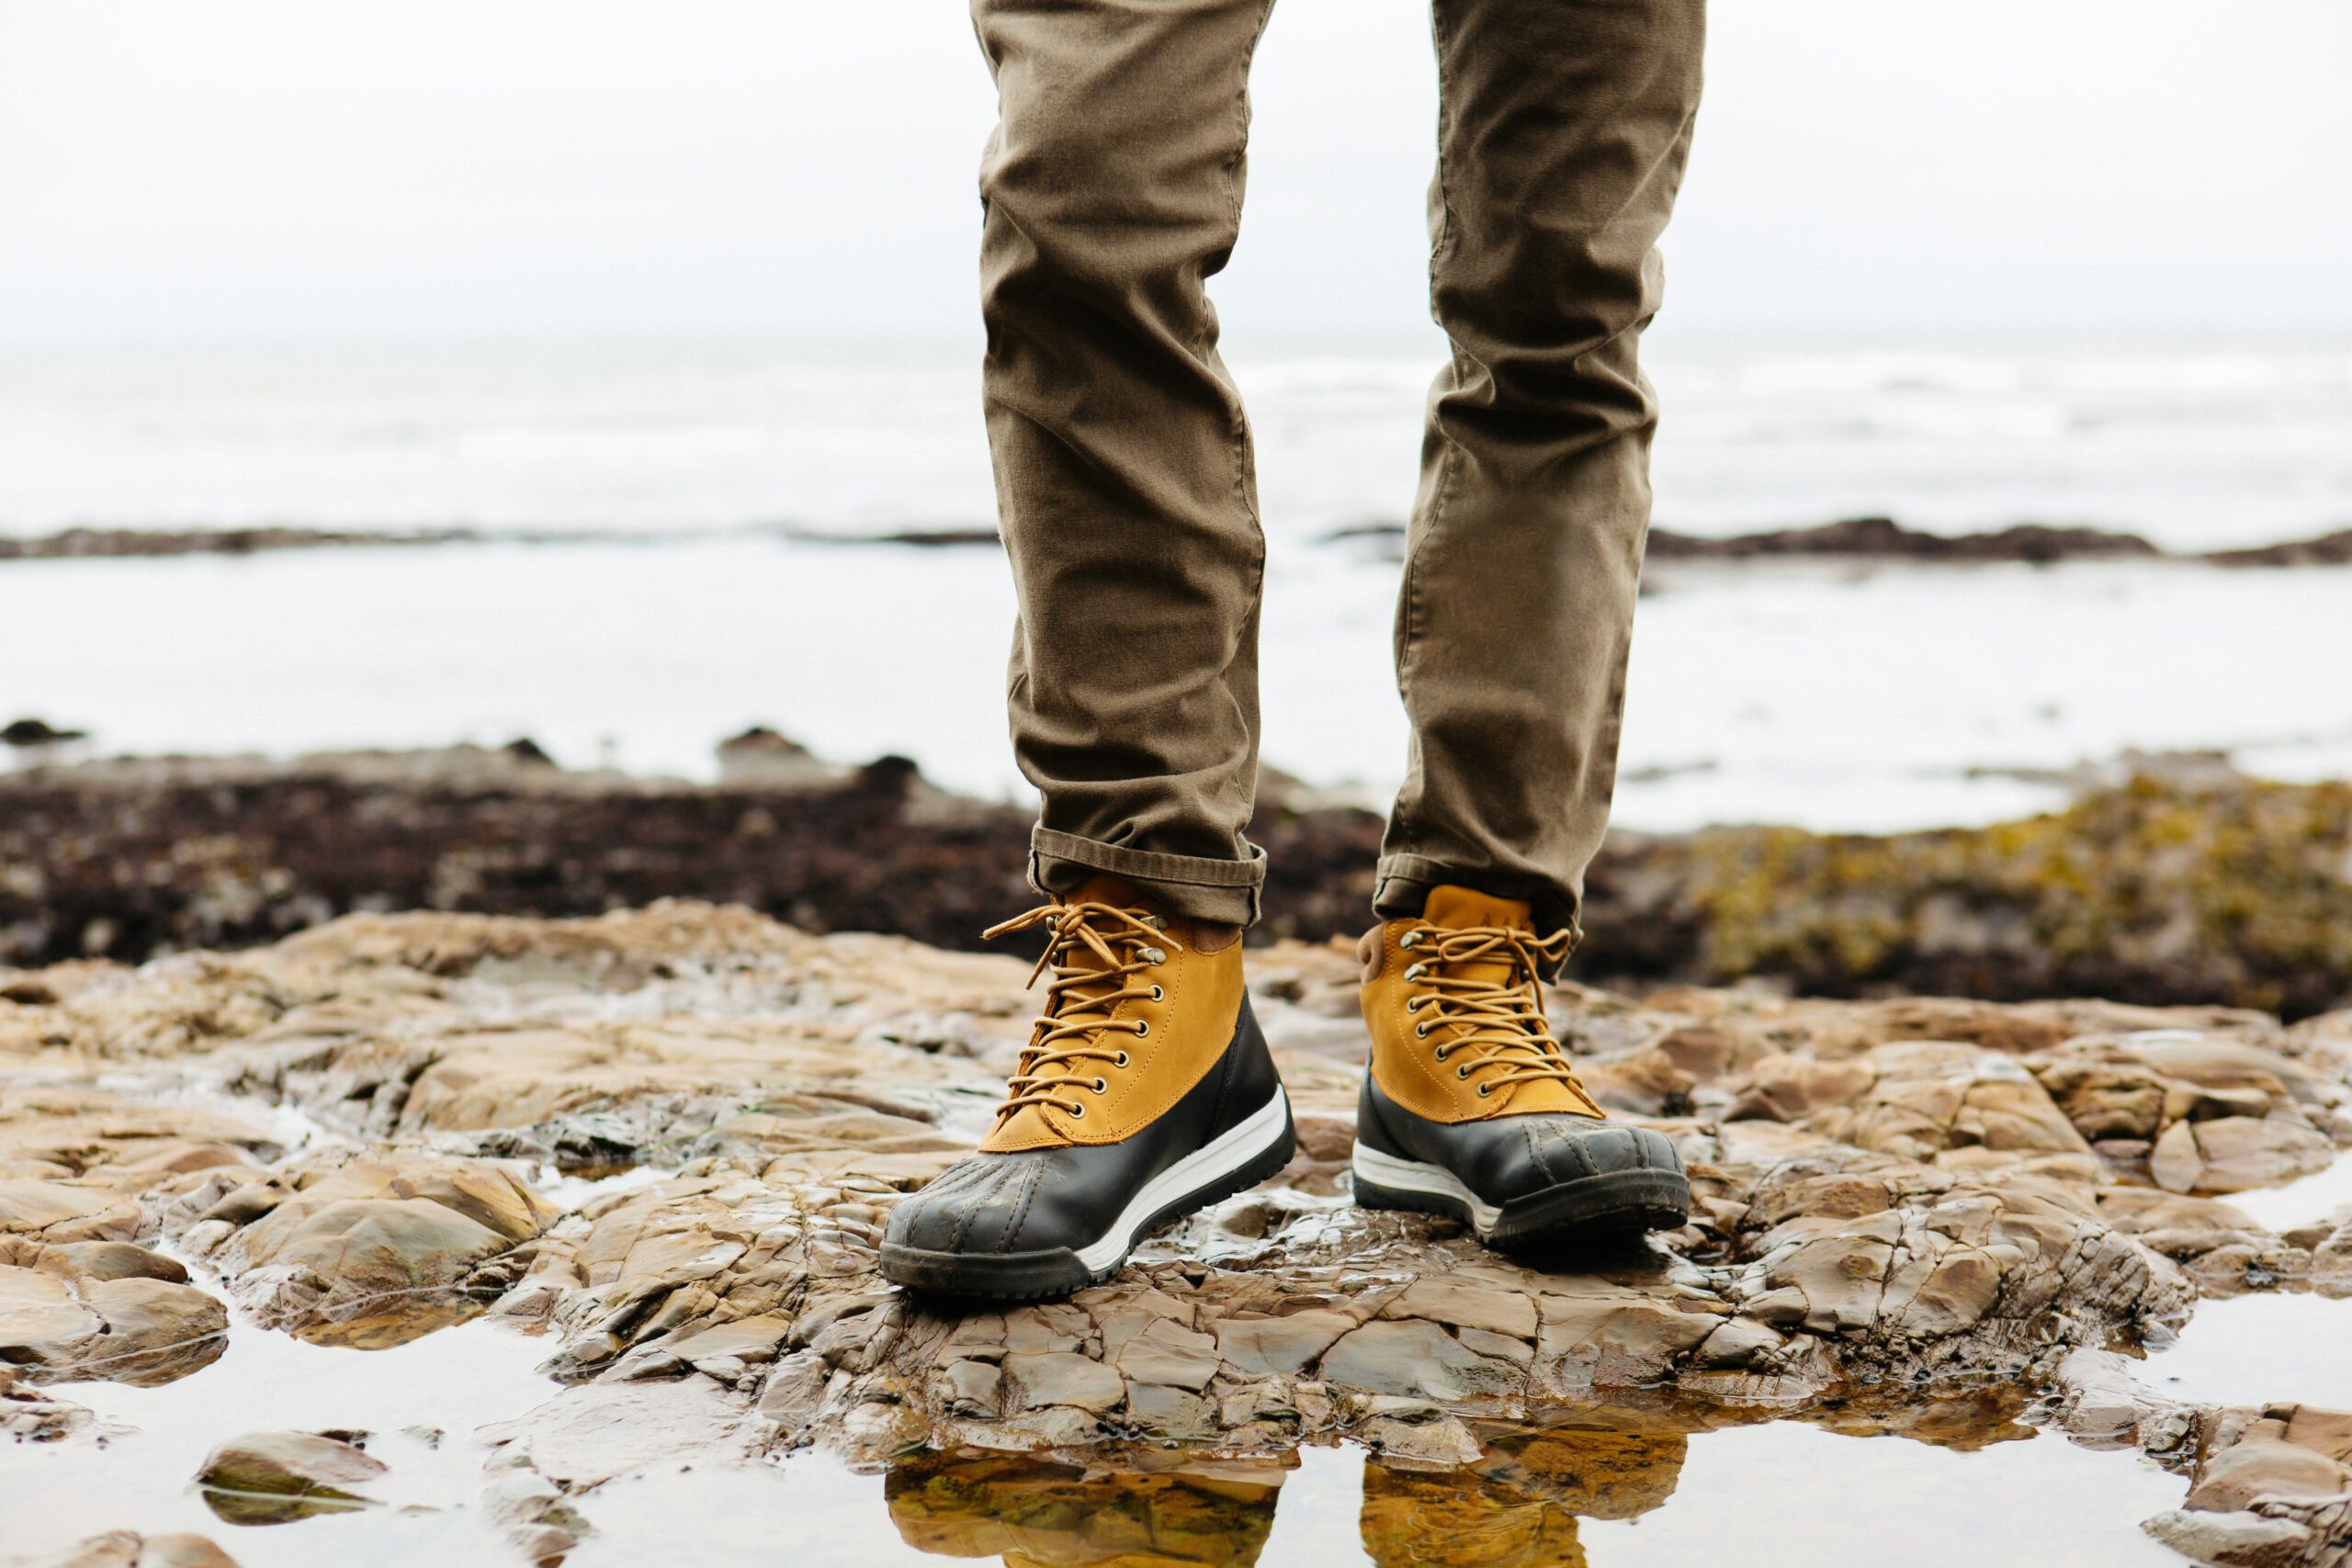 Huckberry’s All-Weather Boot Collection Is Built for All Your Everyday Tasks